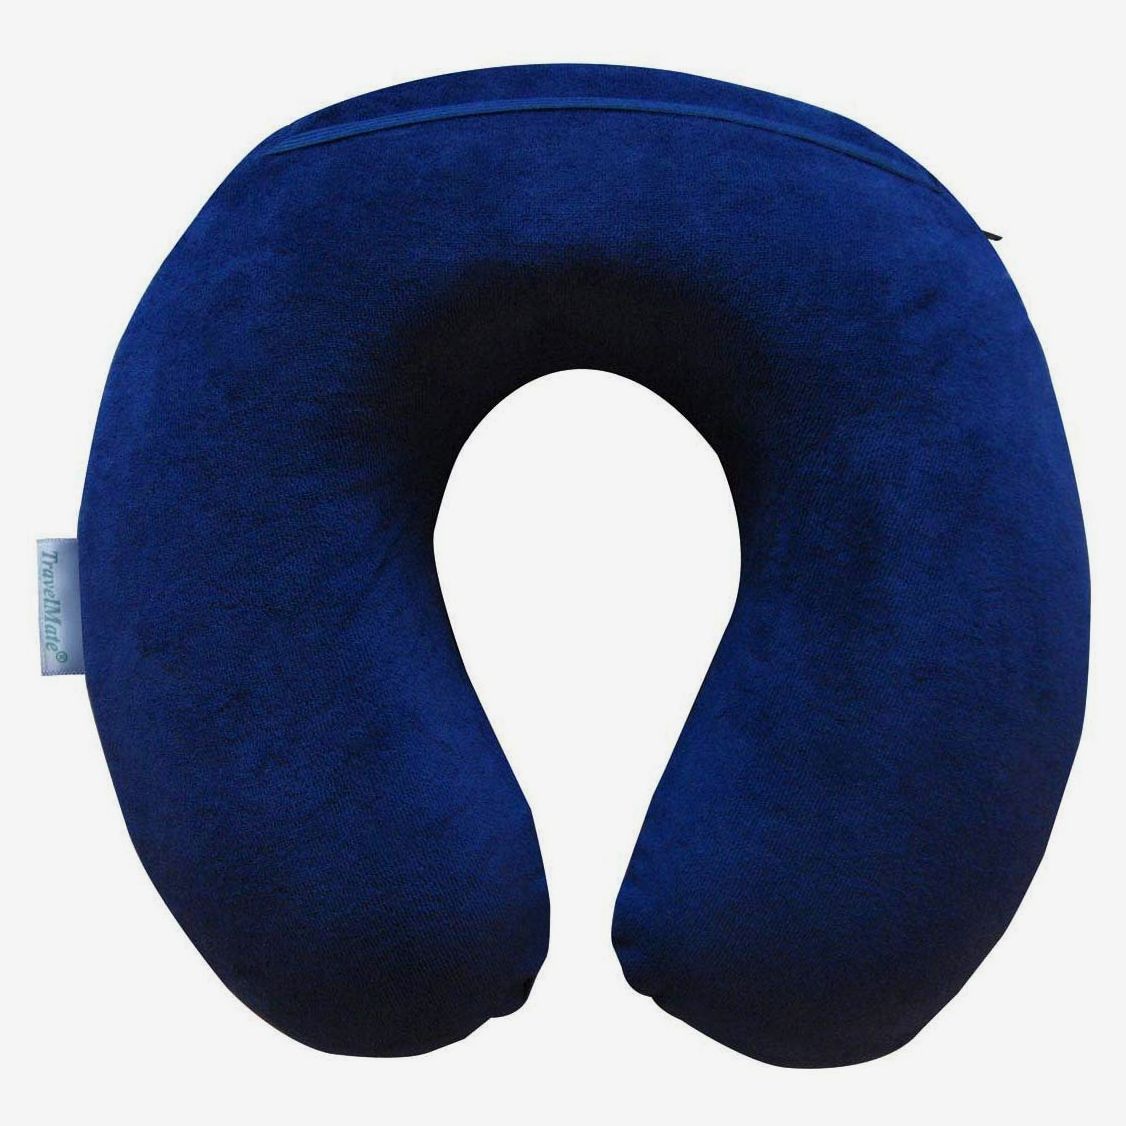 Ear Plug Eye Mask SIMONYI Travel Pillow U Neck Pillow for Airplane Travel,Adjustable Rest Neck Pillow,Washable Memory Foam Neck Support Latex Pillow with Portable Storage Bag Black